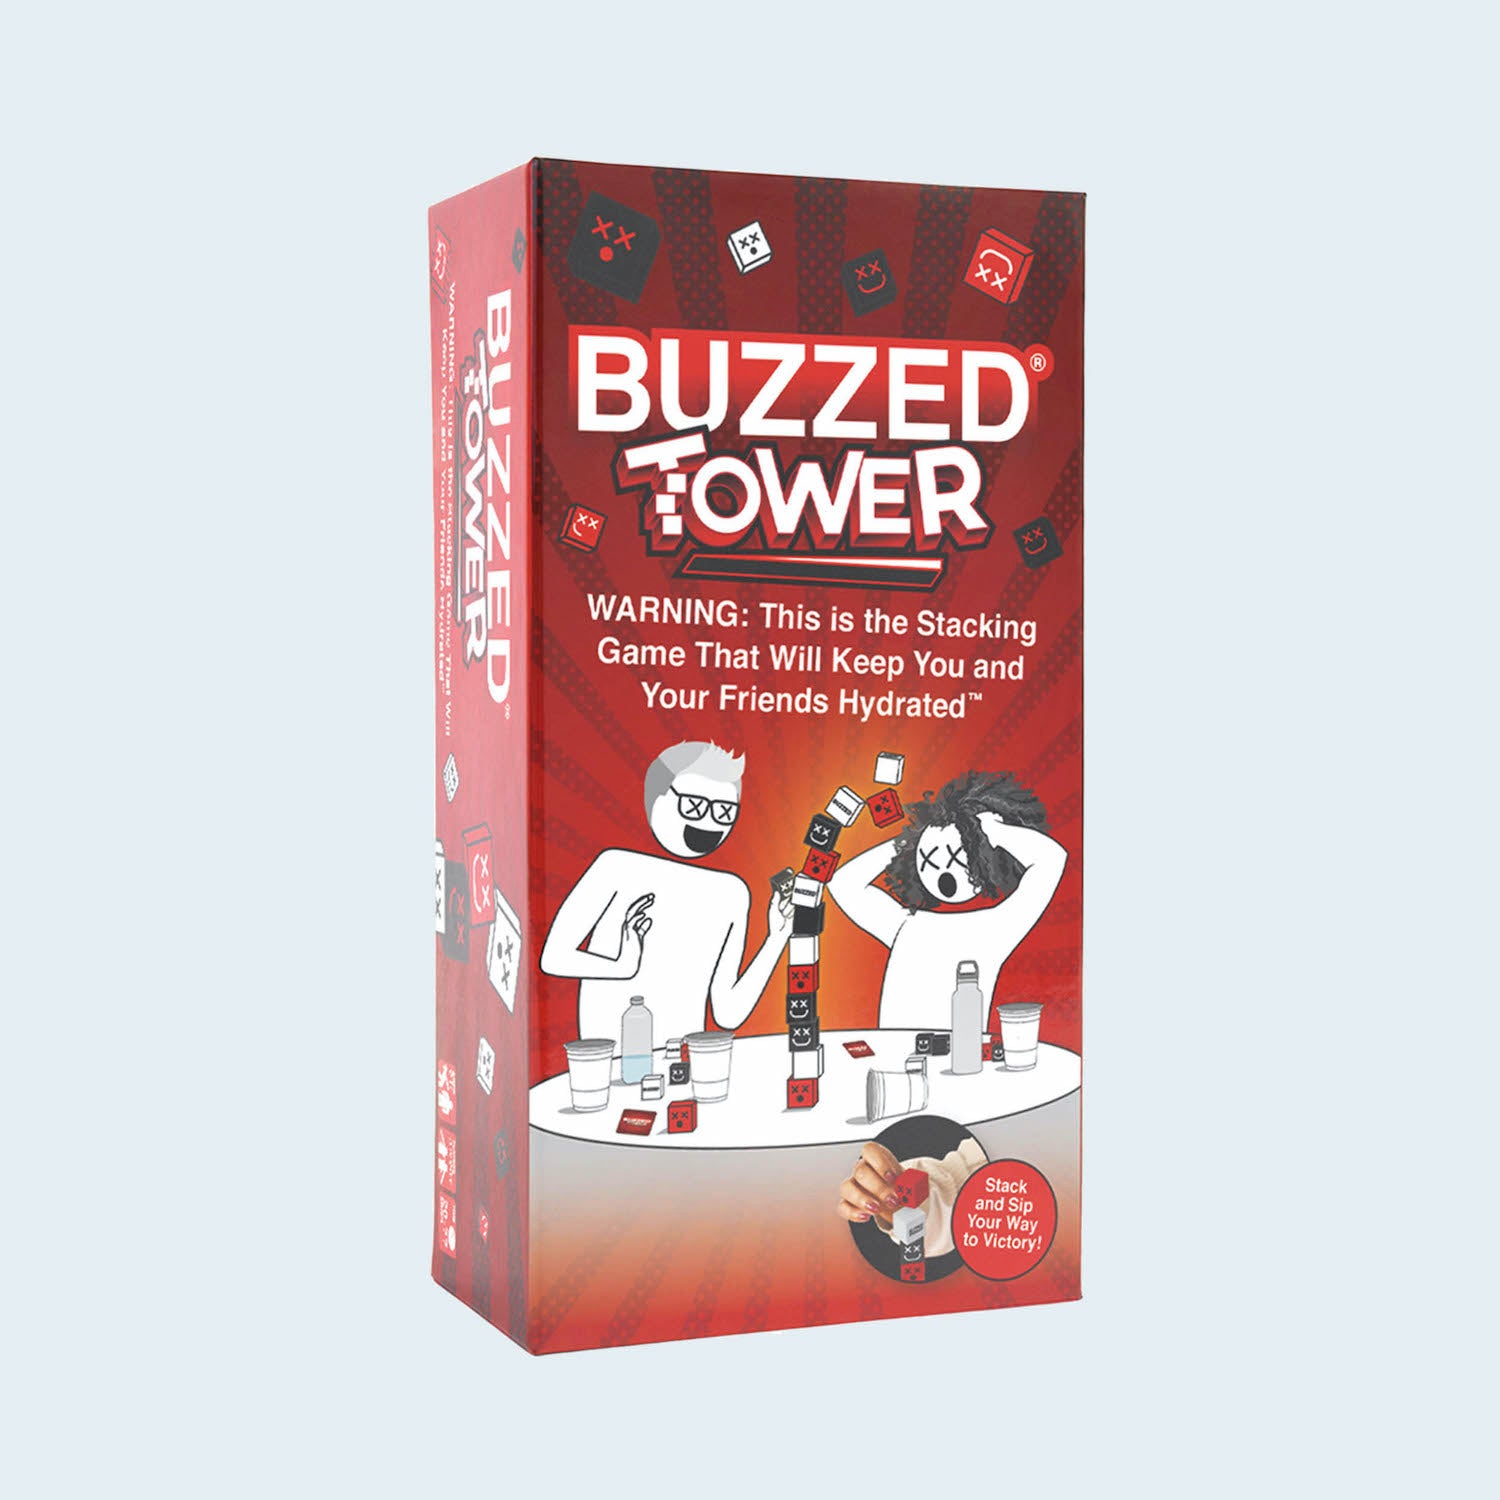 buzzed-tower-game-box-and-game-play-01-what-do-you-meme-by-relatable